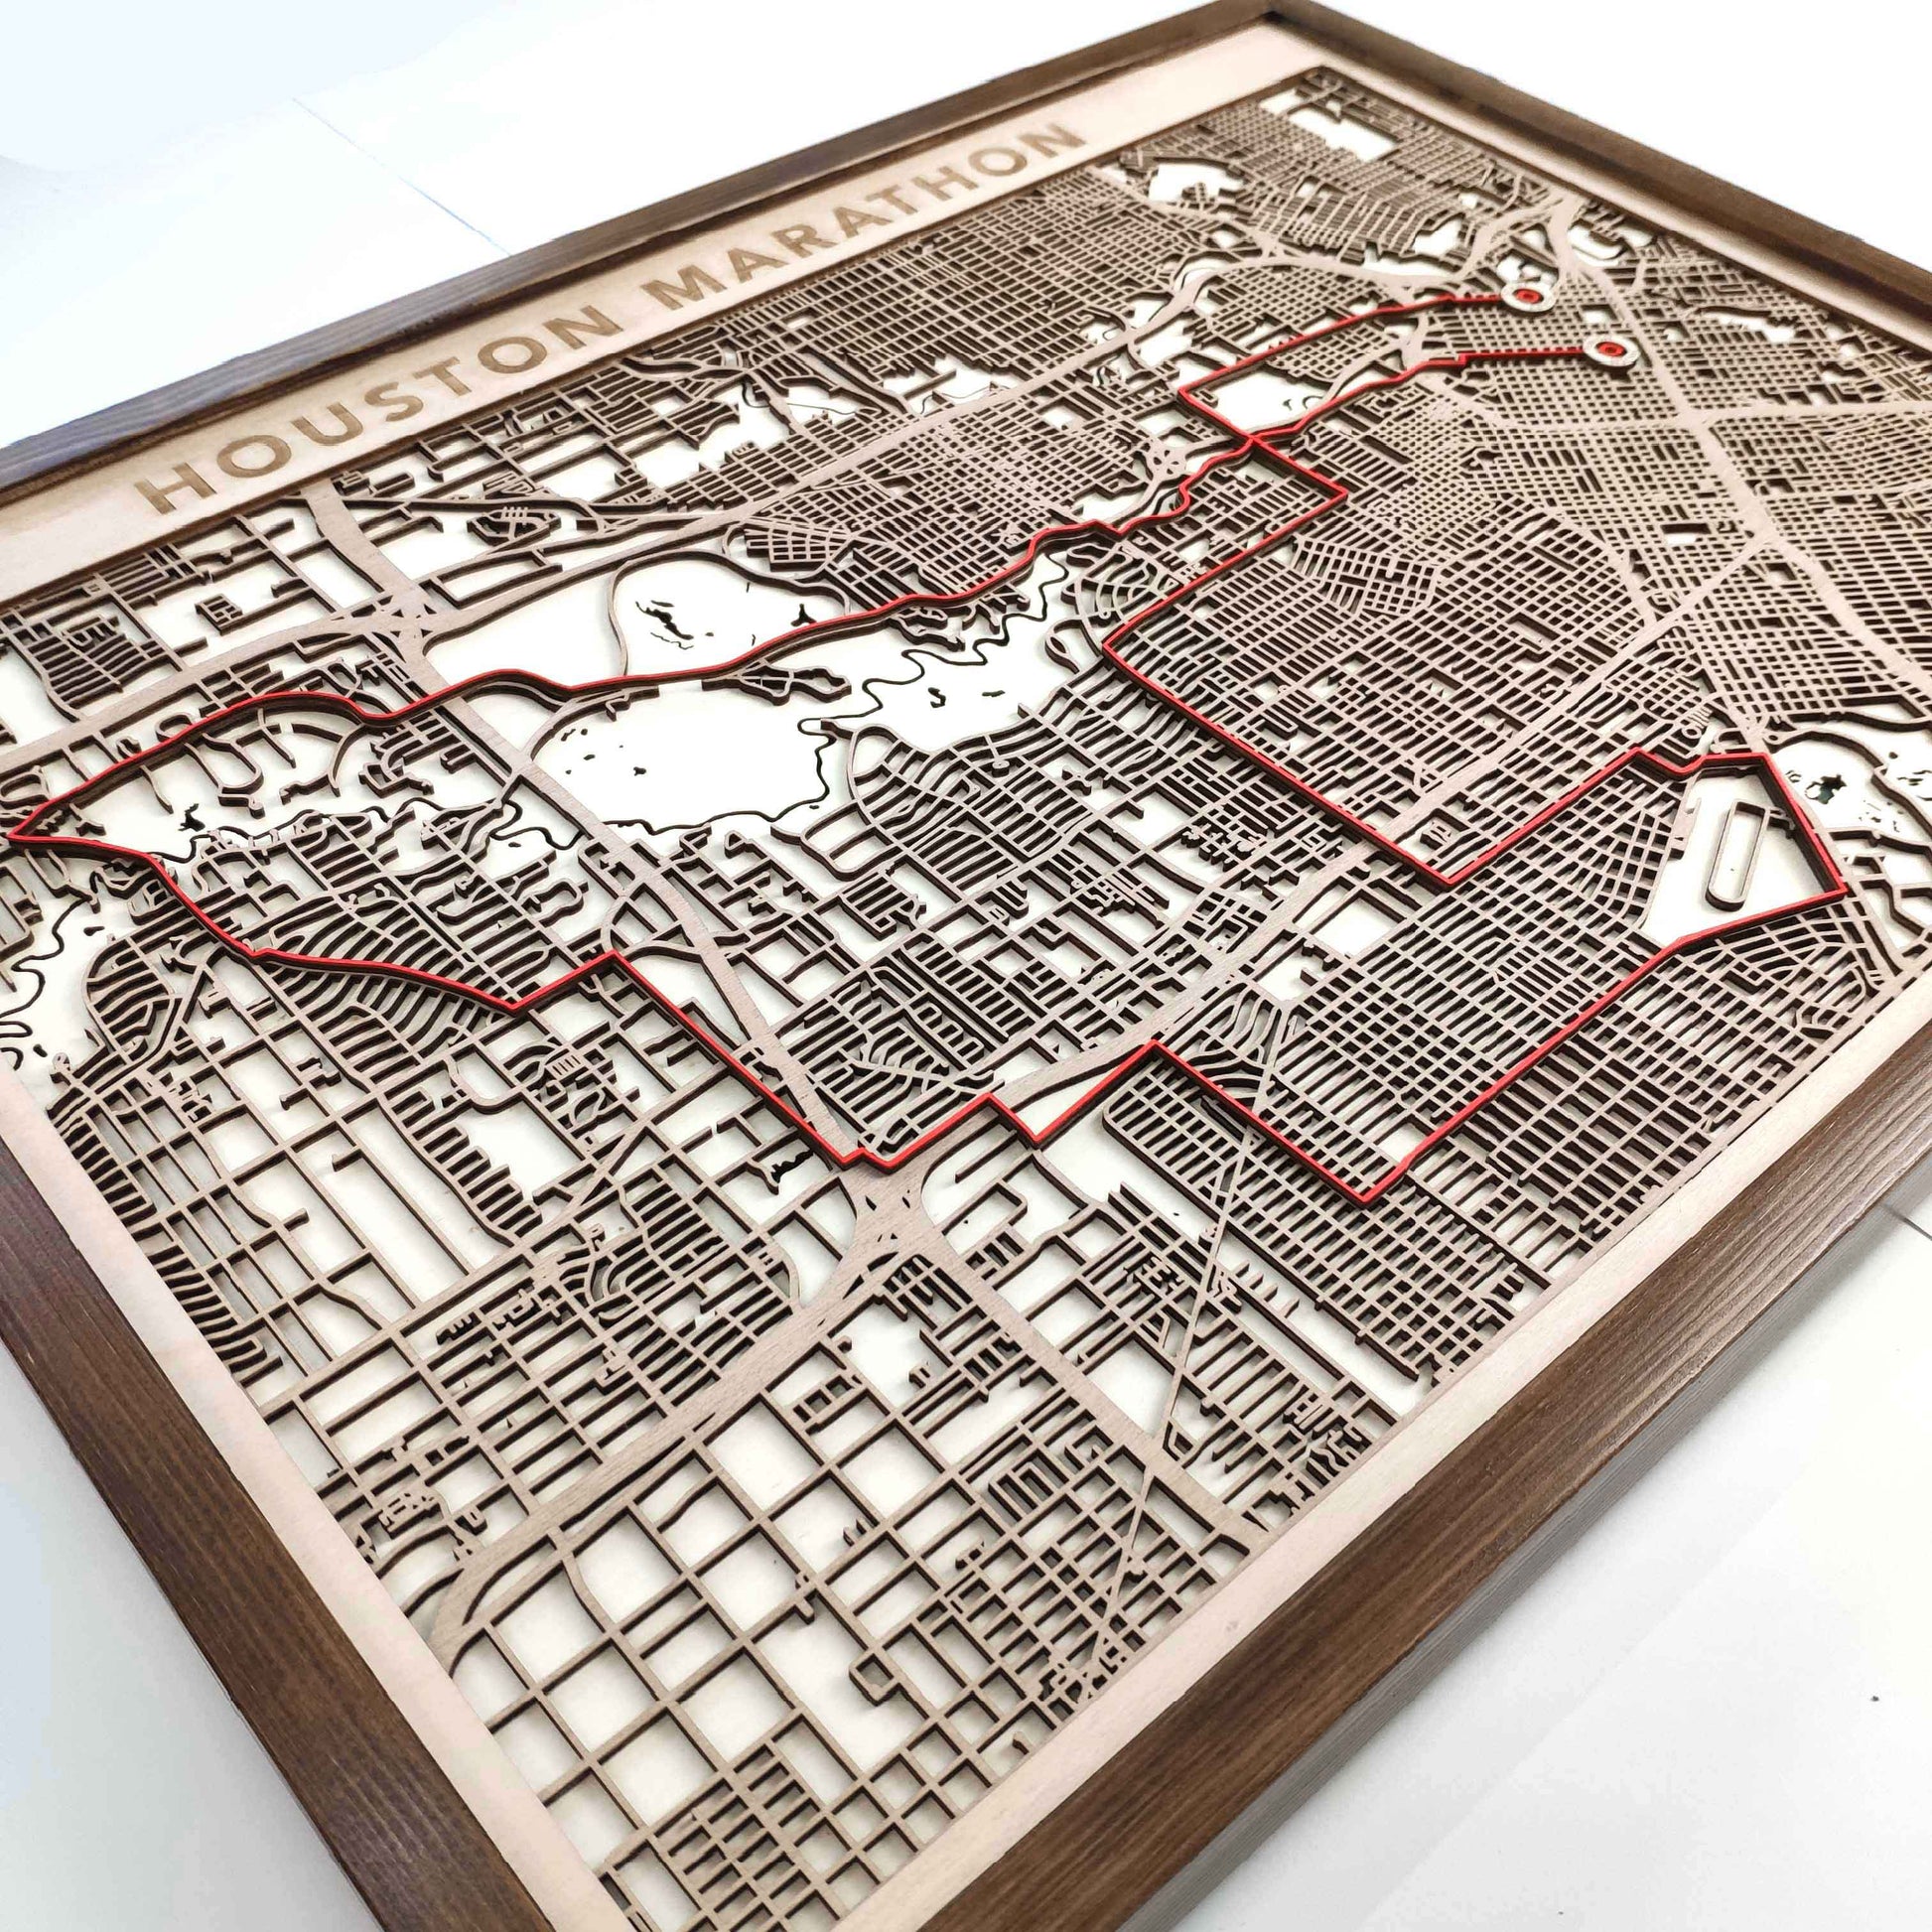 Houston Marathon Laser-Cut Wooden Map – Unique Runner Poster Gift by CityWood - Custom Wood Map Art - Unique Laser Cut Engraved - Anniversary Gift